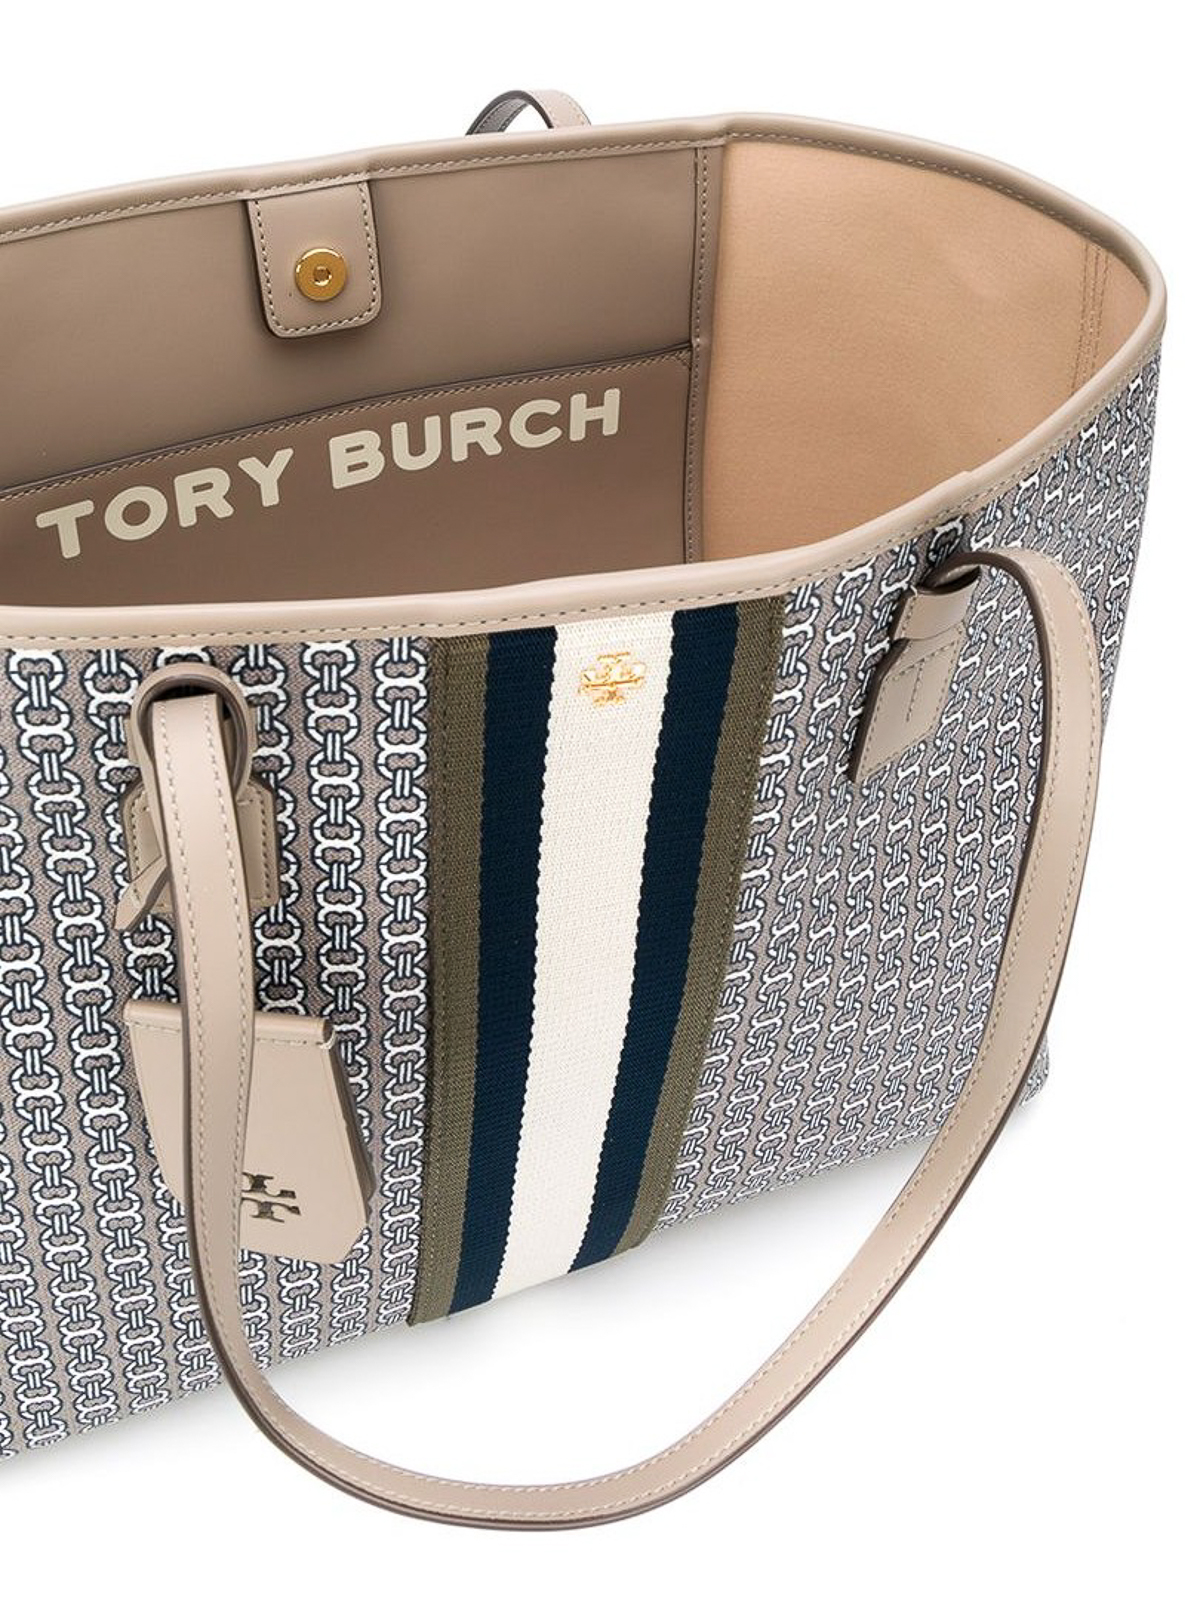 Burch outlet tory toryburch